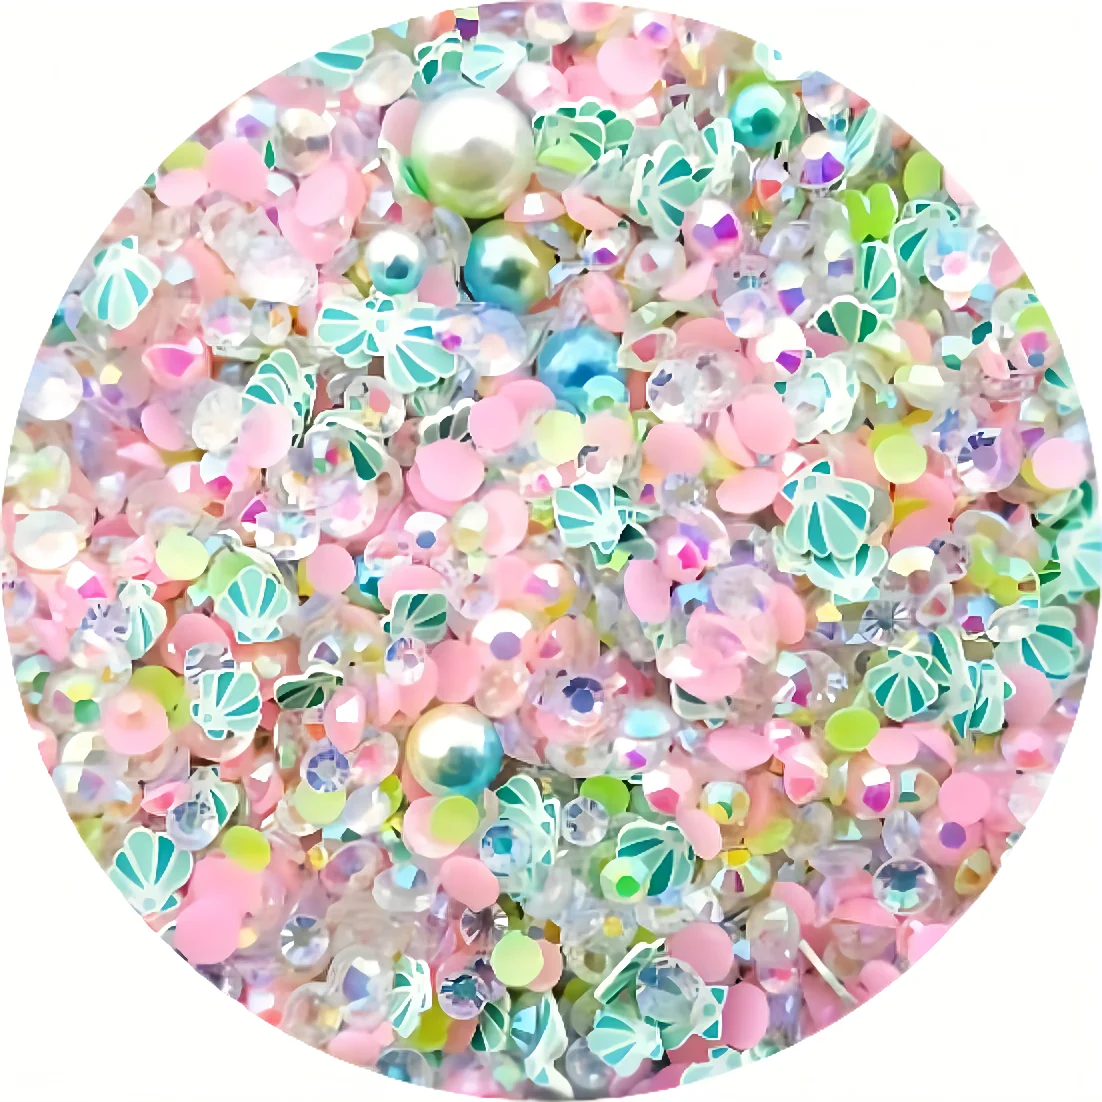 

Mixed Shell Crystal Pearls Polymer Slices Clay Sprinkles For DIY Crafts Tiny Cute Plastic Klei Mud Particles Slime Filling Mater